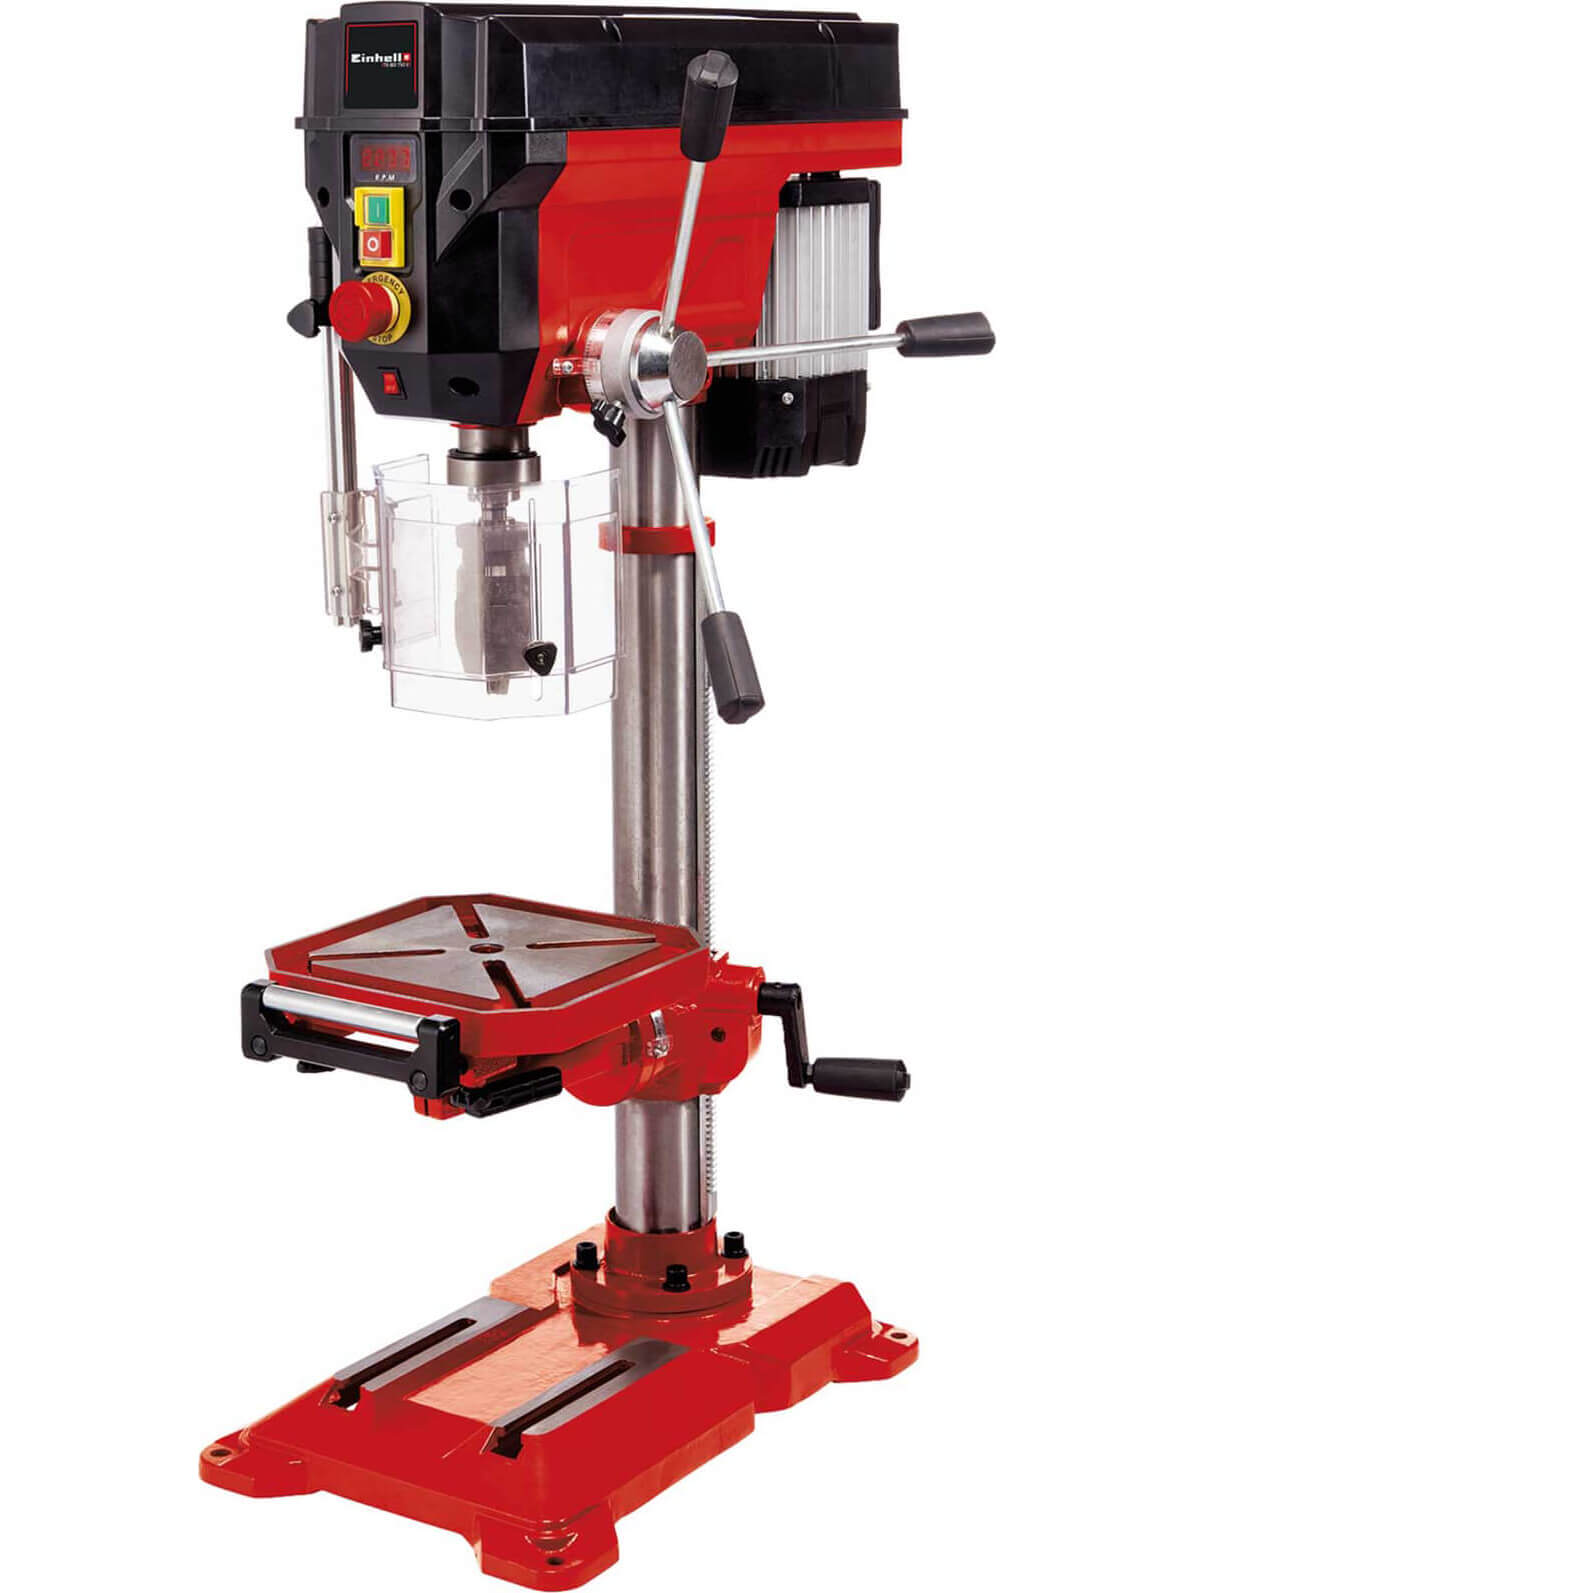 Image of Einhell TE-BD 750 E Bench Drill